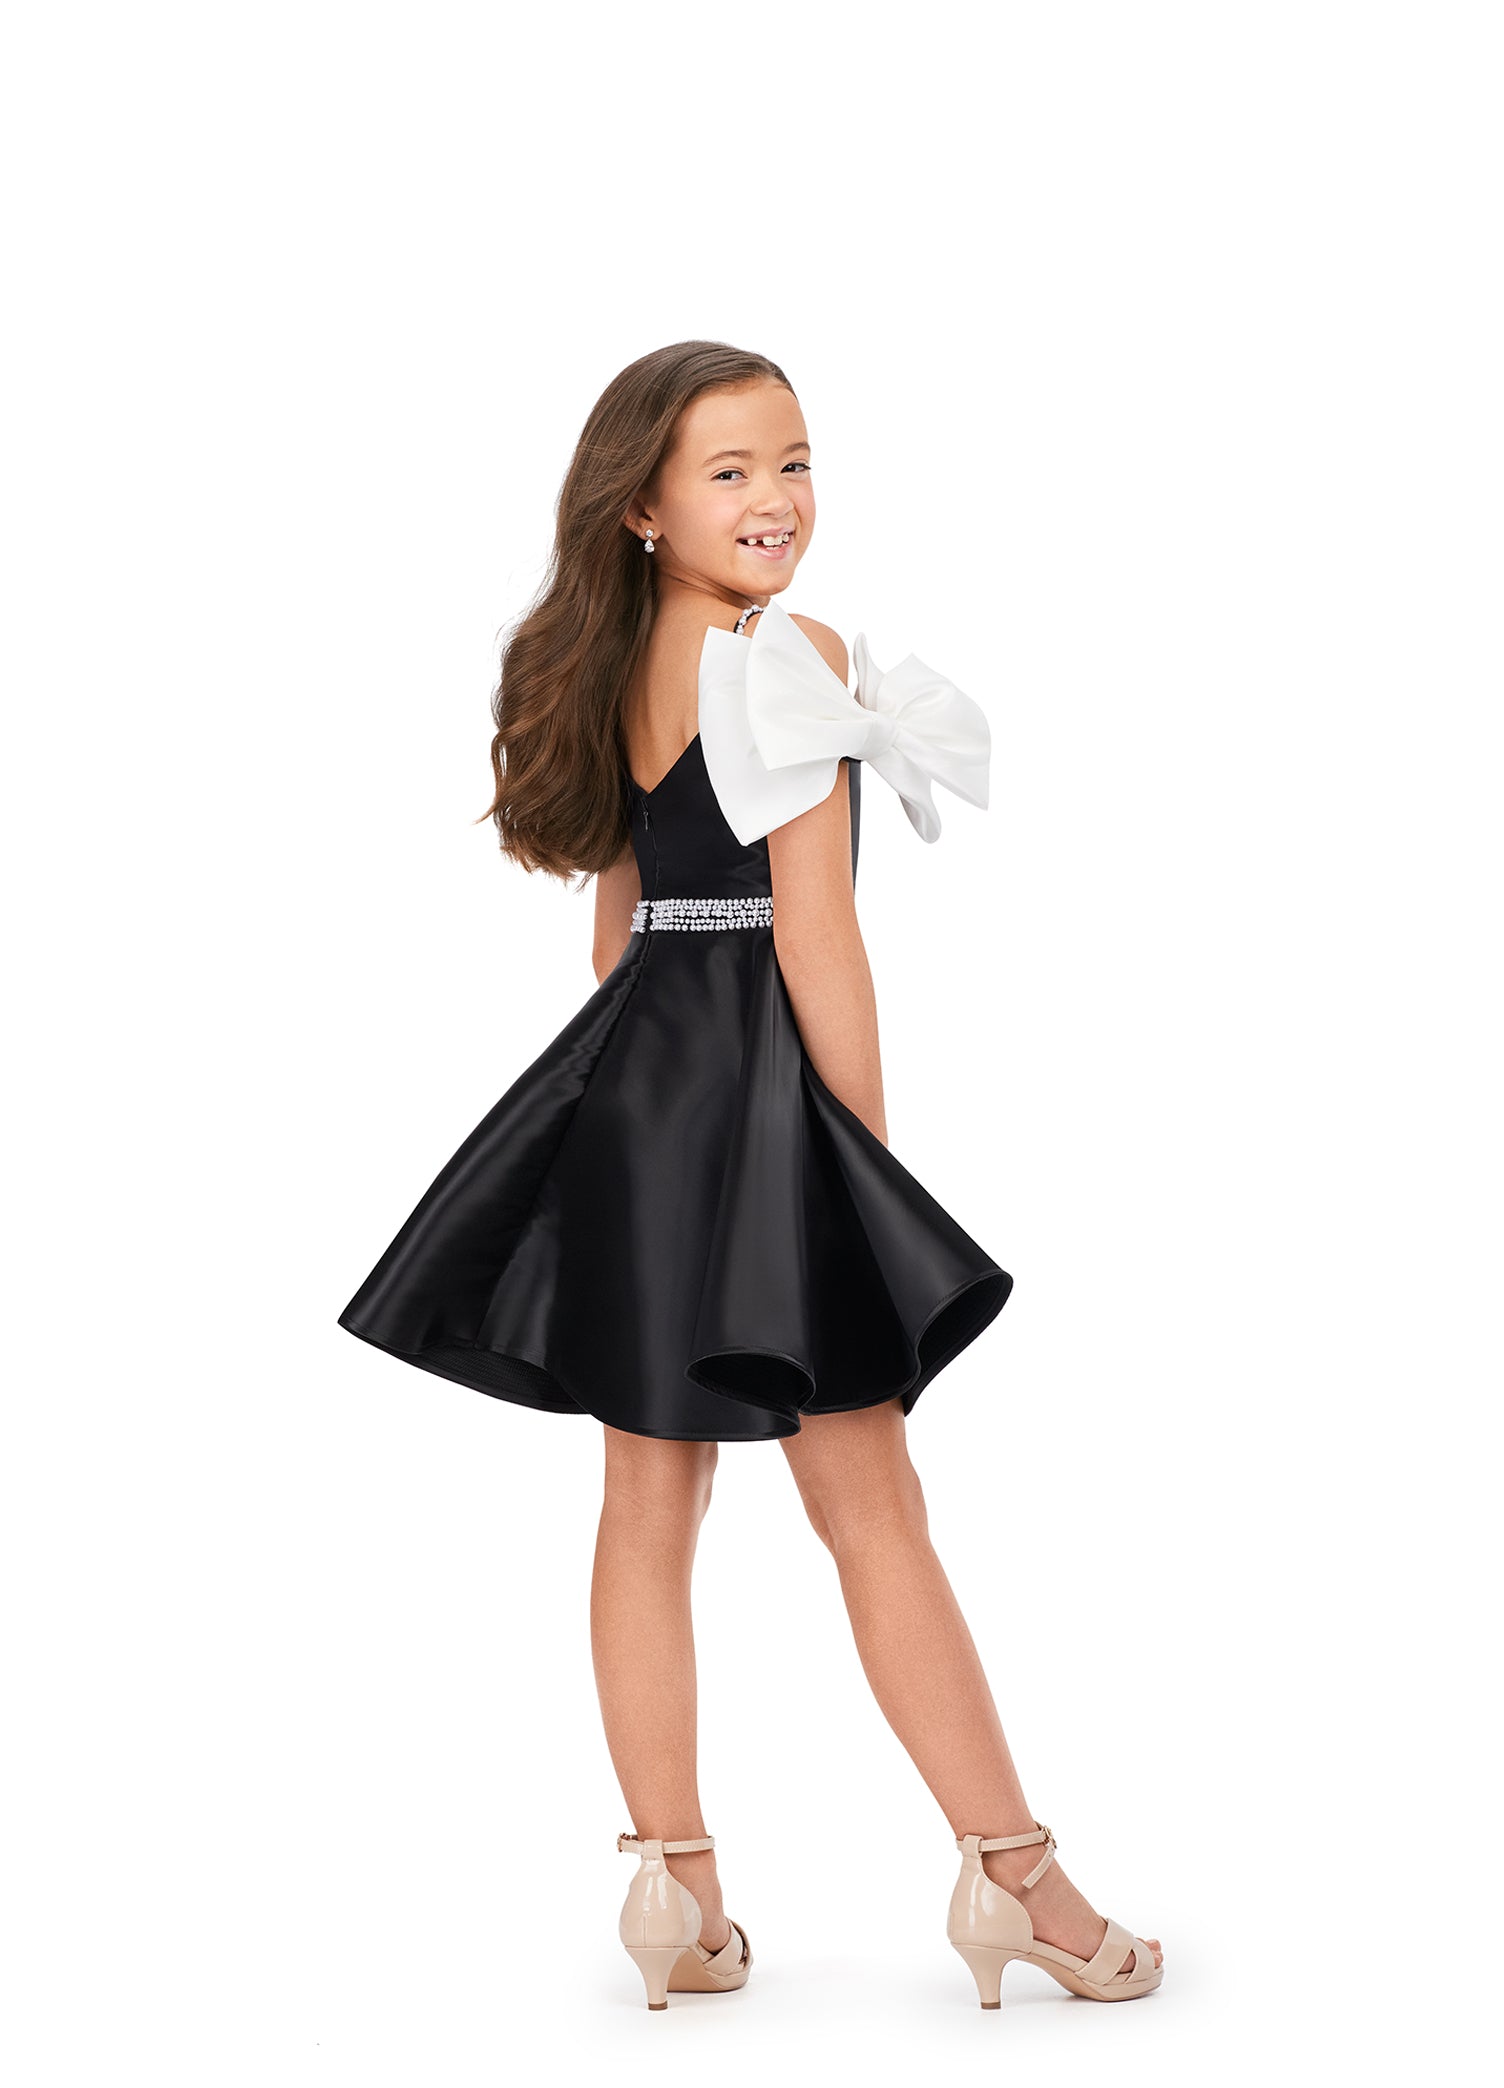 Ashley Lauren Kids 8223 Off The Shoulder With Bows A-Line Beaded Belt Detail Phantom Satin Coctail Dress. Cuteness overload in this fun satin dress! With its beautiful pearl belt and bow sleeves, this is a must for any little fashionista.